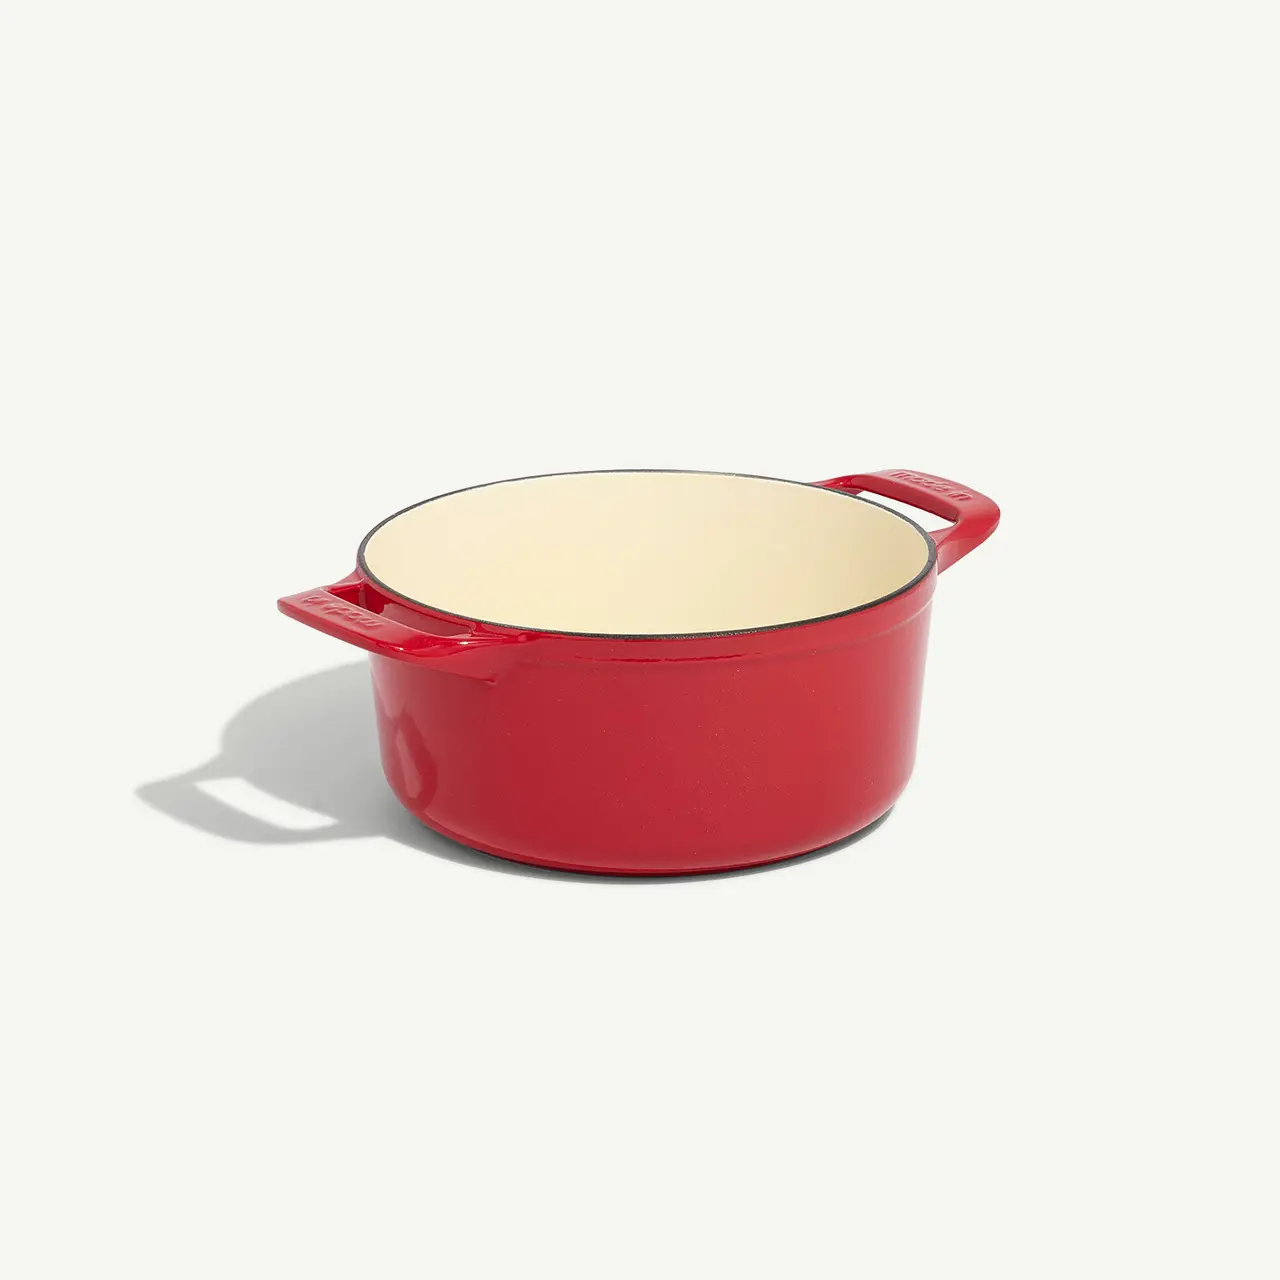 A red enameled cast iron Dutch oven sits on a light surface.